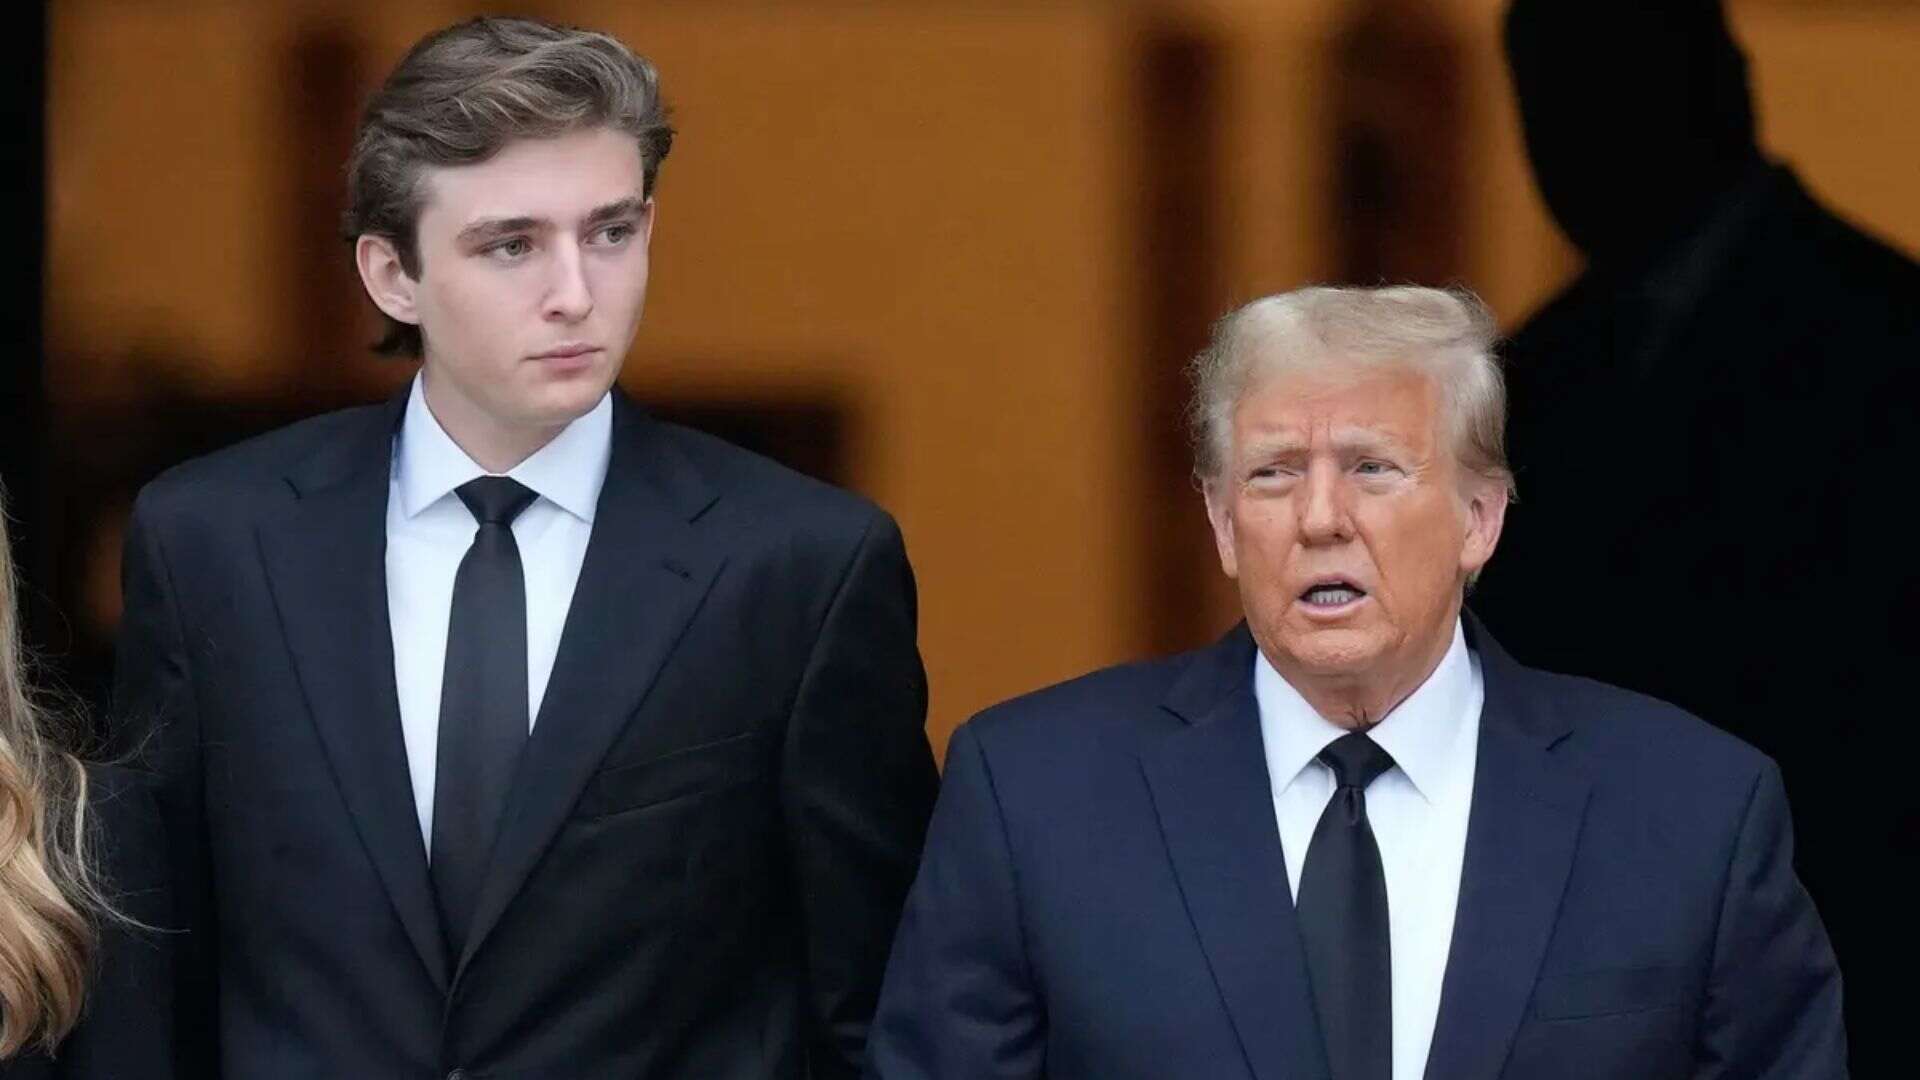 Barron Trump Absent From RNC As Donald Trump Delivers Closing-Night Speech